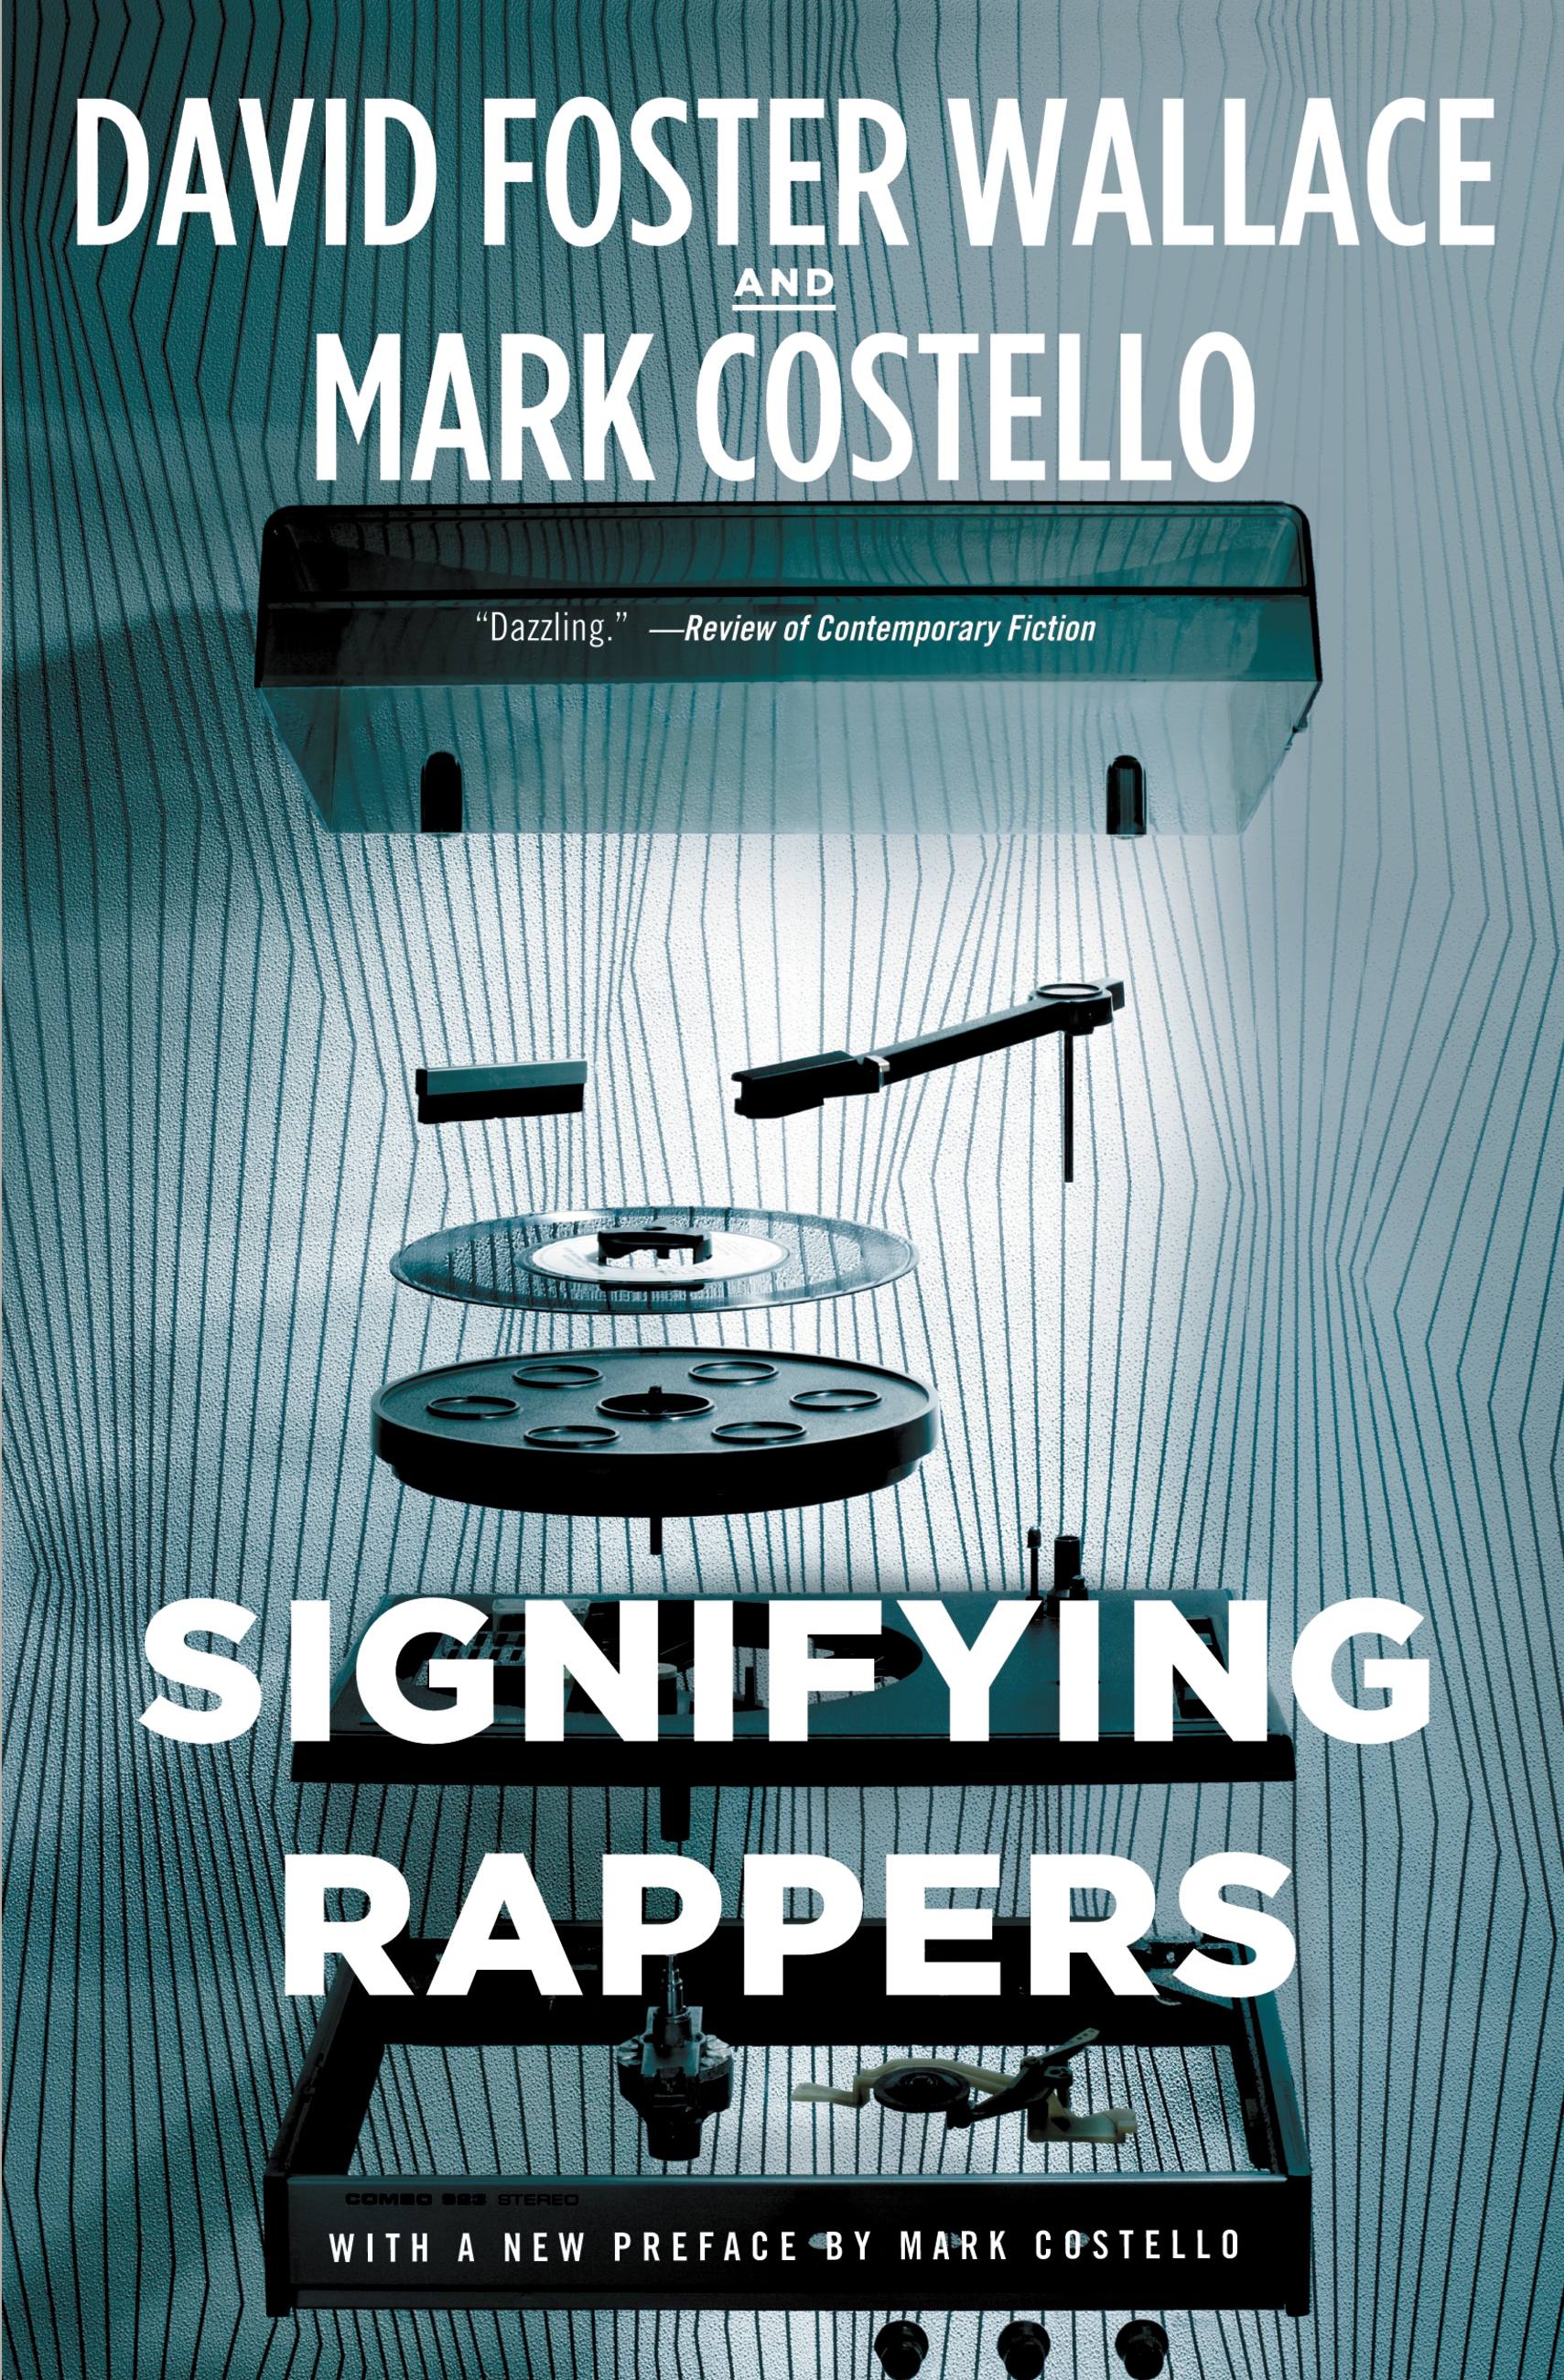 Xxx Force Rap In Kitchen - Signifying Rappers by David Foster Wallace | Hachette Book Group